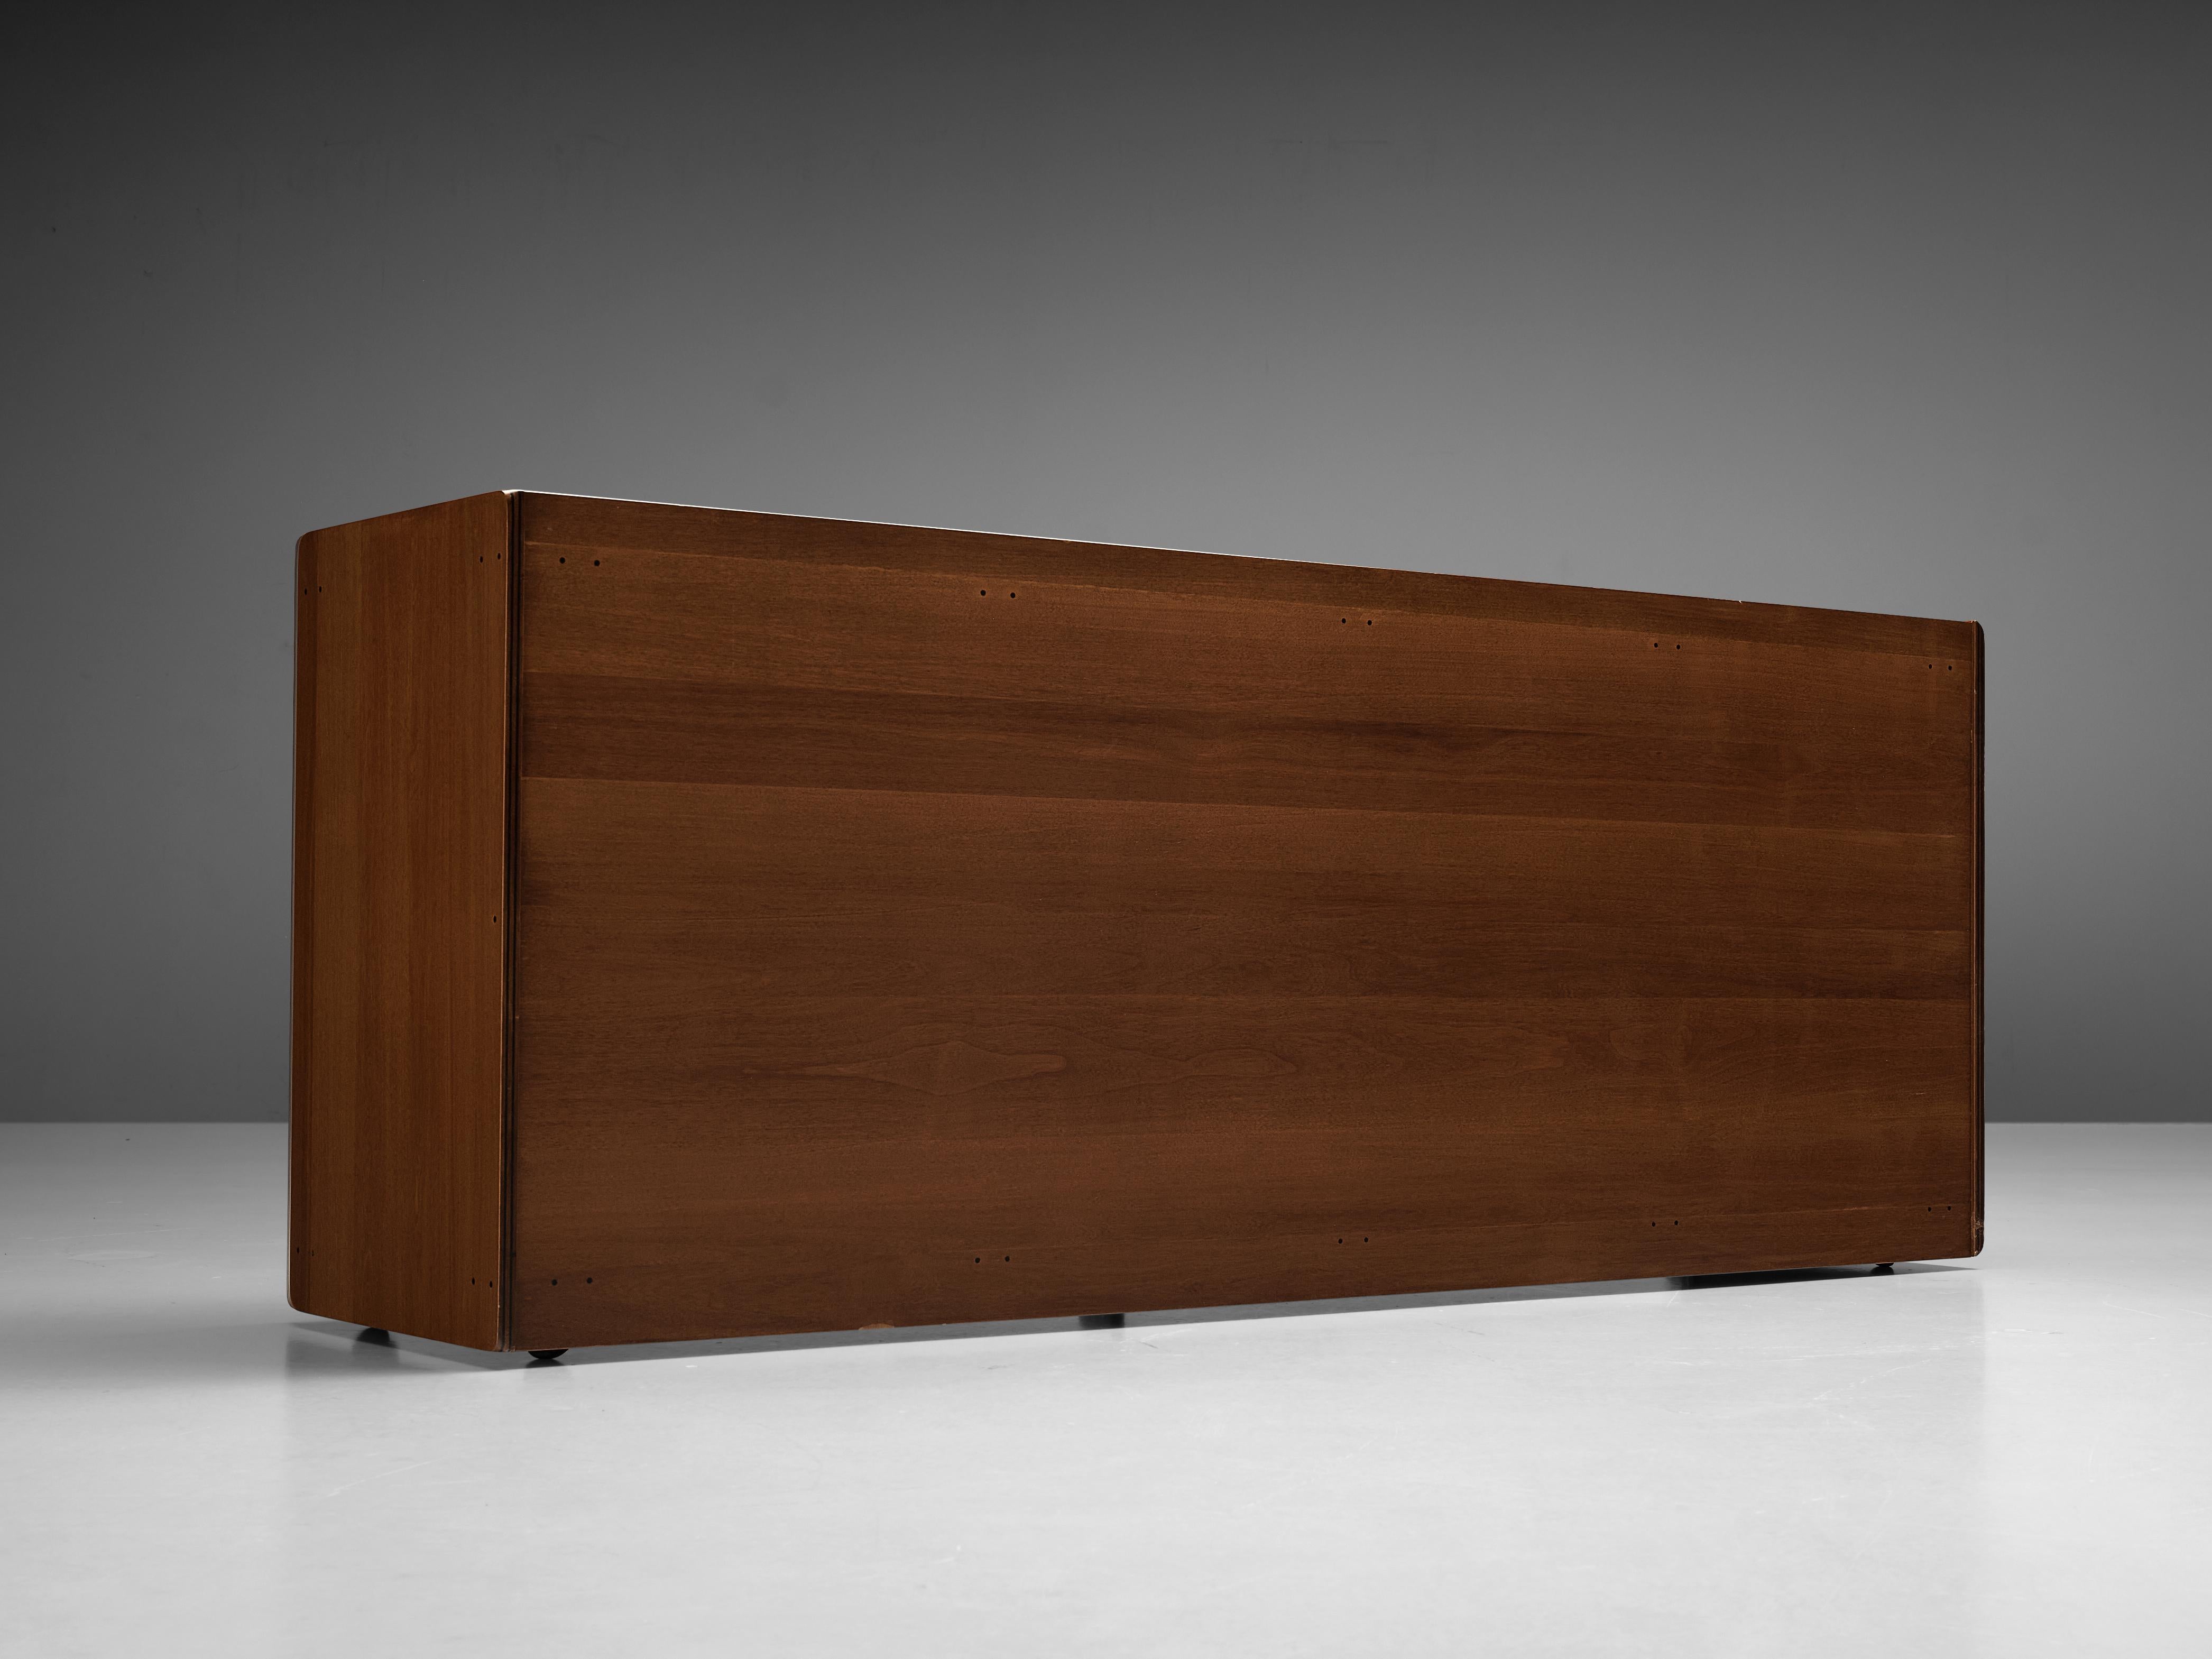 Afra & Tobia Scarpa 'Artona' Chest of Drawers in Black Leather and Walnut 2